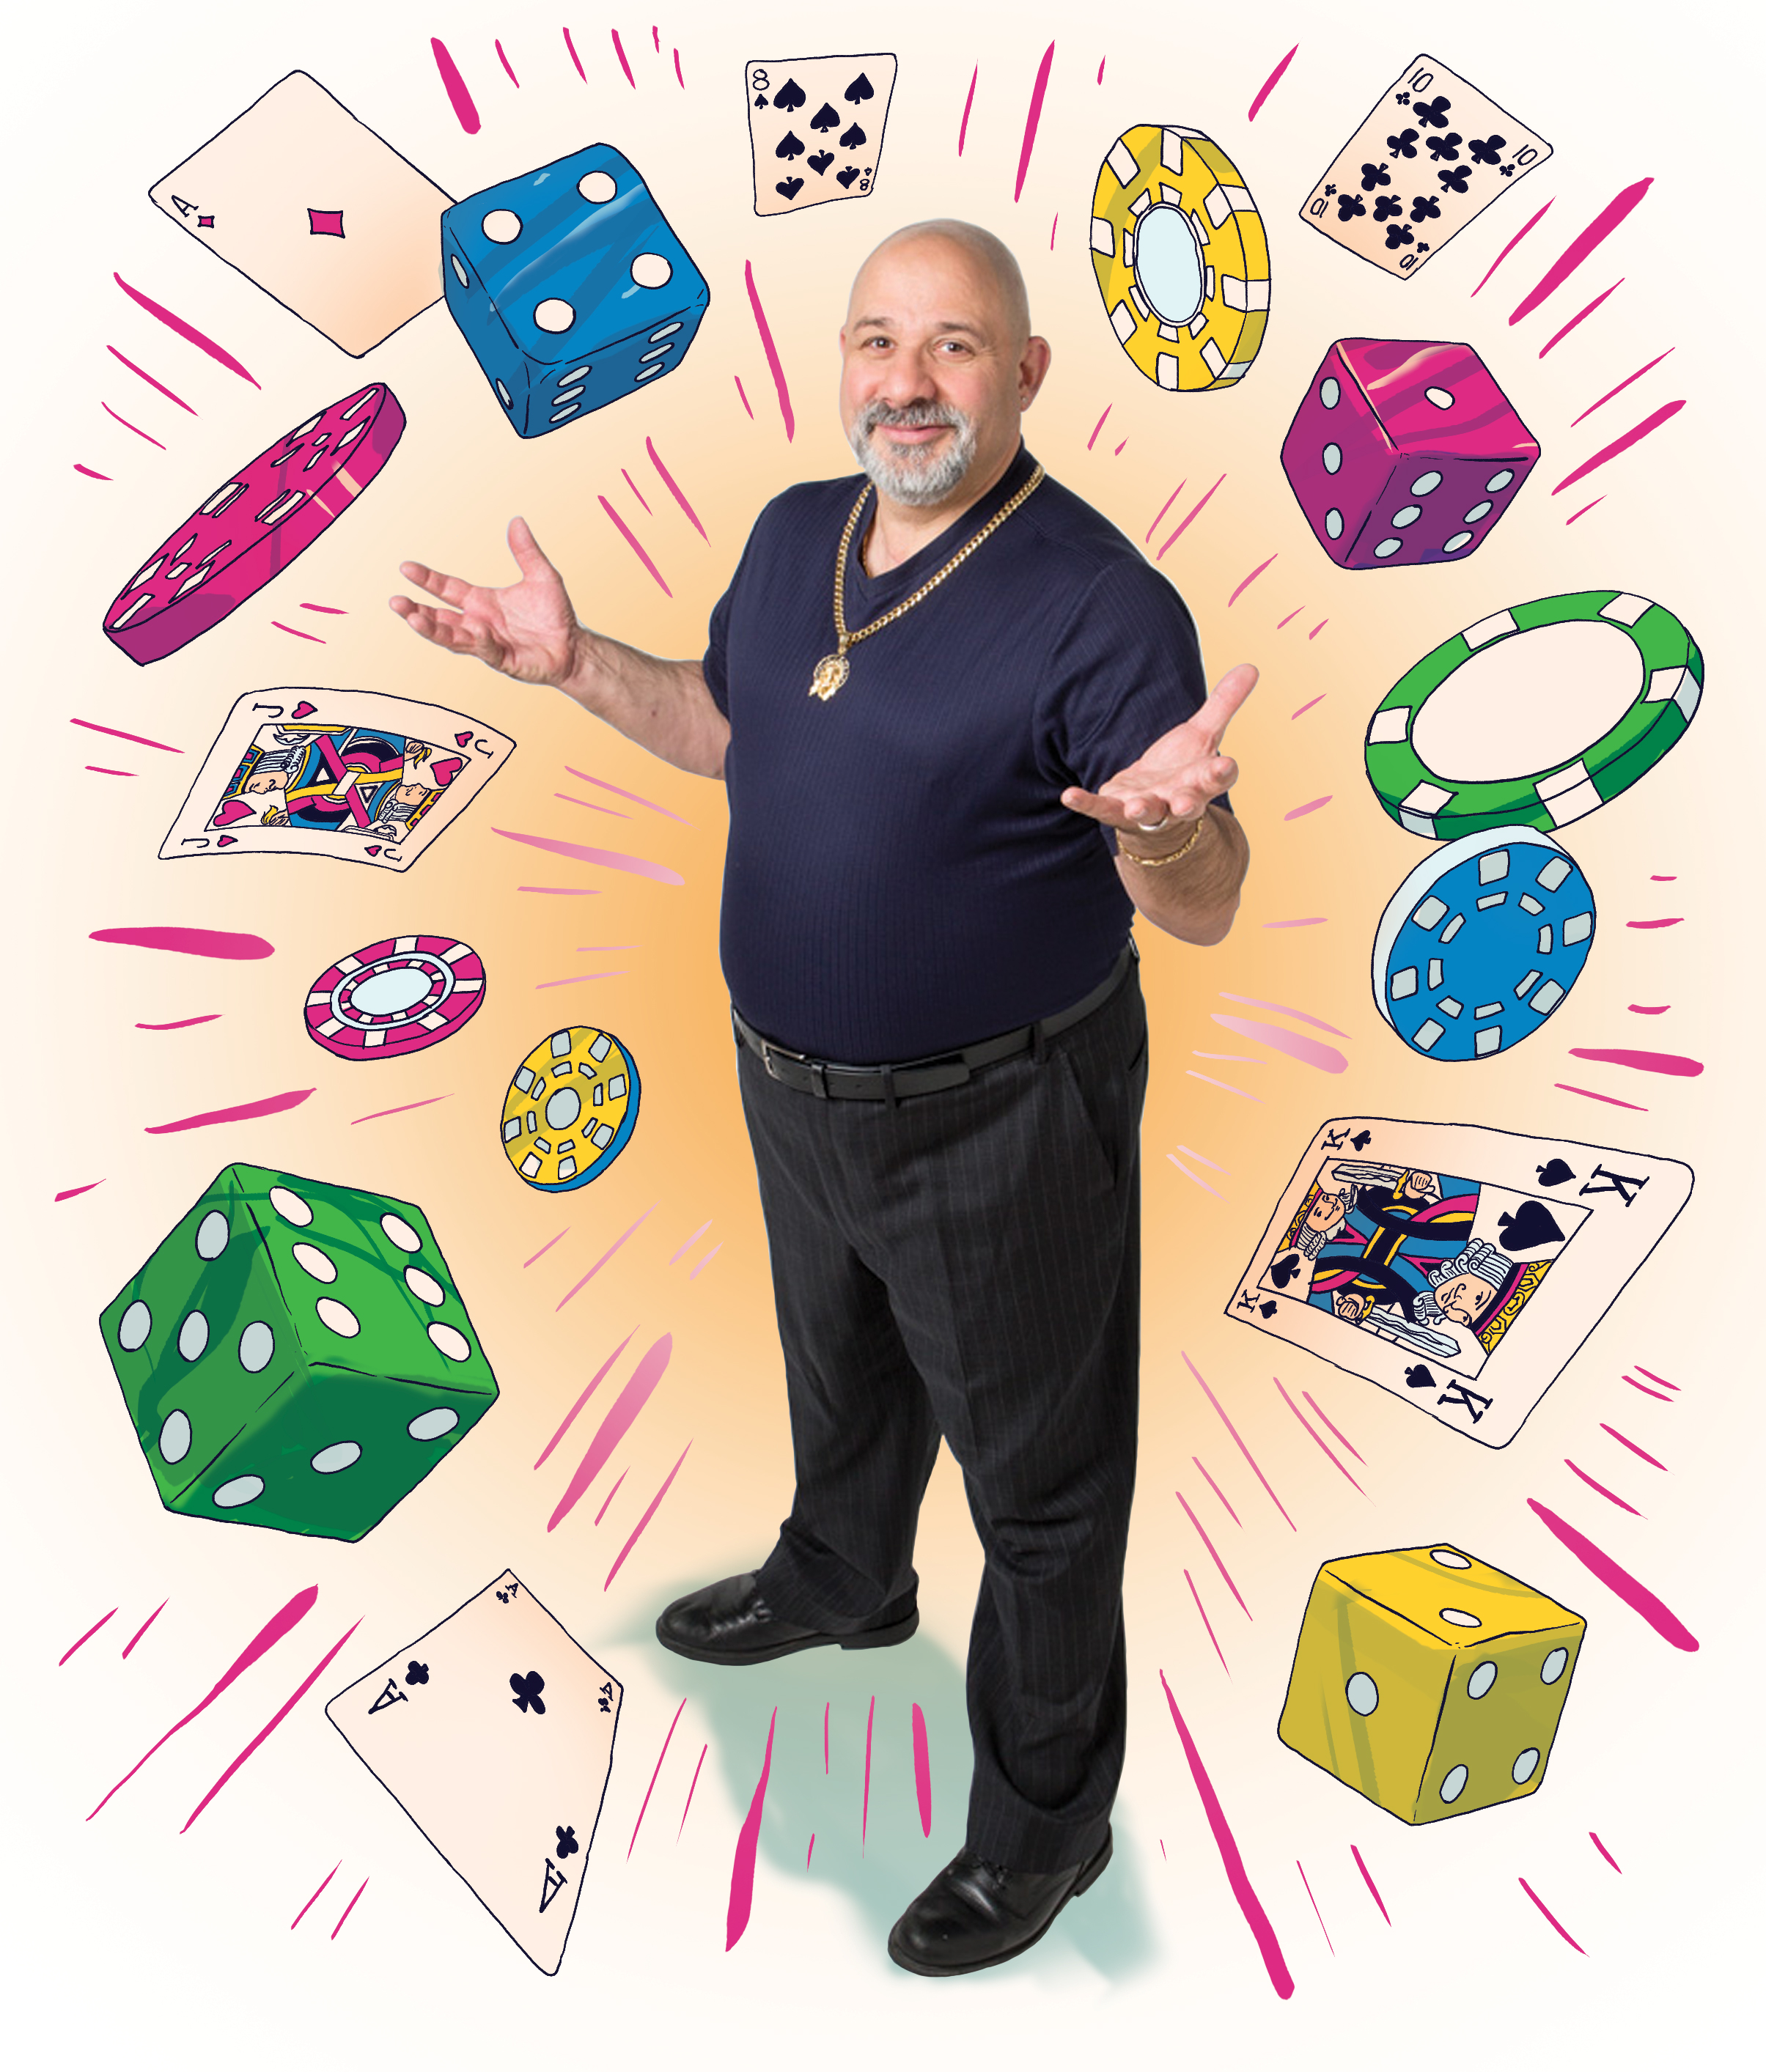 Gambler is surrounded by cards and dice